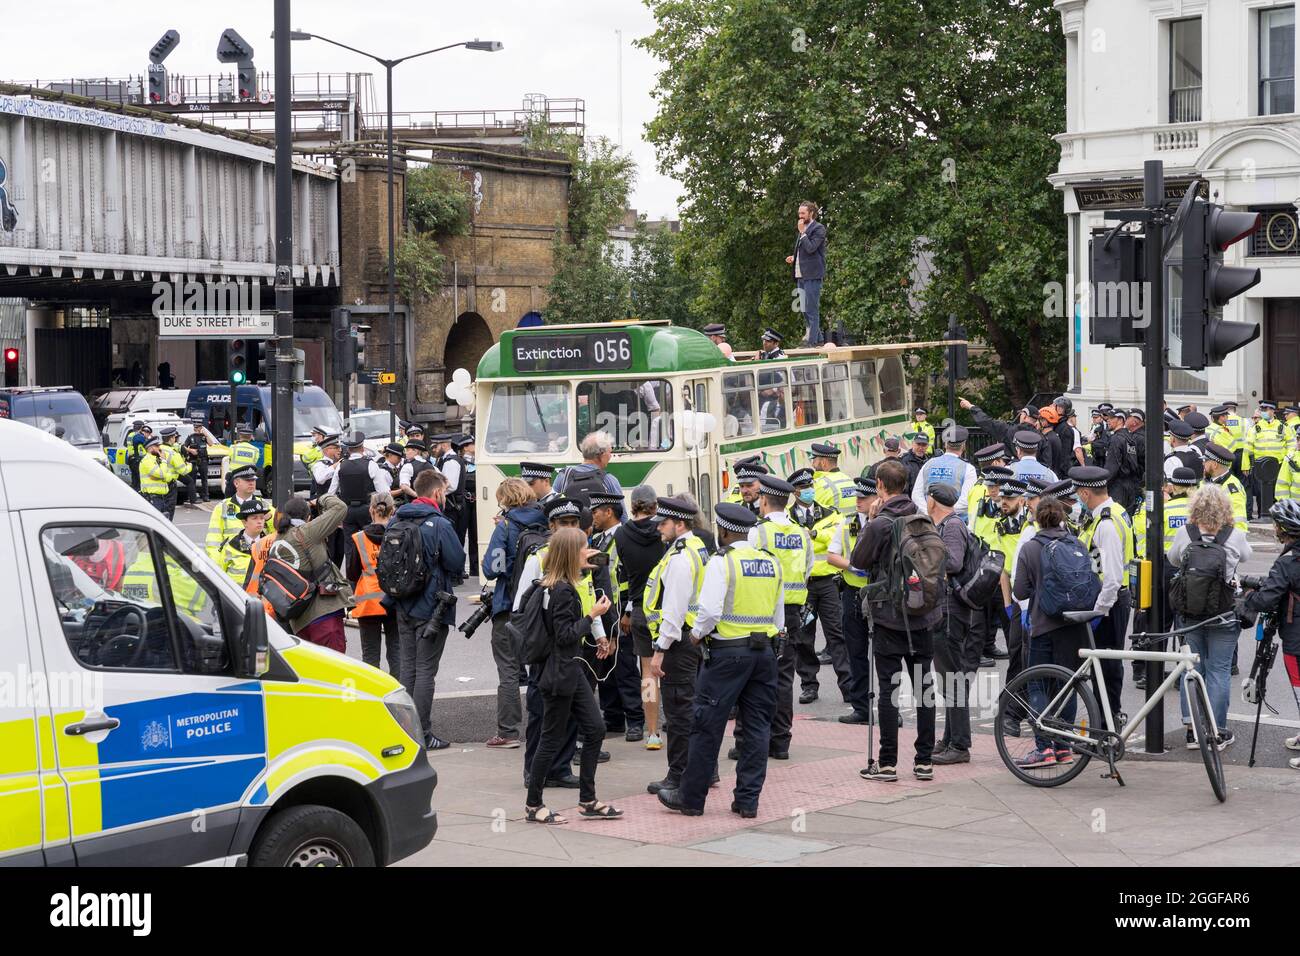 London, UK. 31sth August 2021. Extinction Rebellion XR blocks off London Bridge to traffics from Borough market to monument as climate protests continue. demonstration  vintage wedding  bus is draped in the banner saying 'invest in life'.Credit: Xiu Bao/Alamy Live News Stock Photo